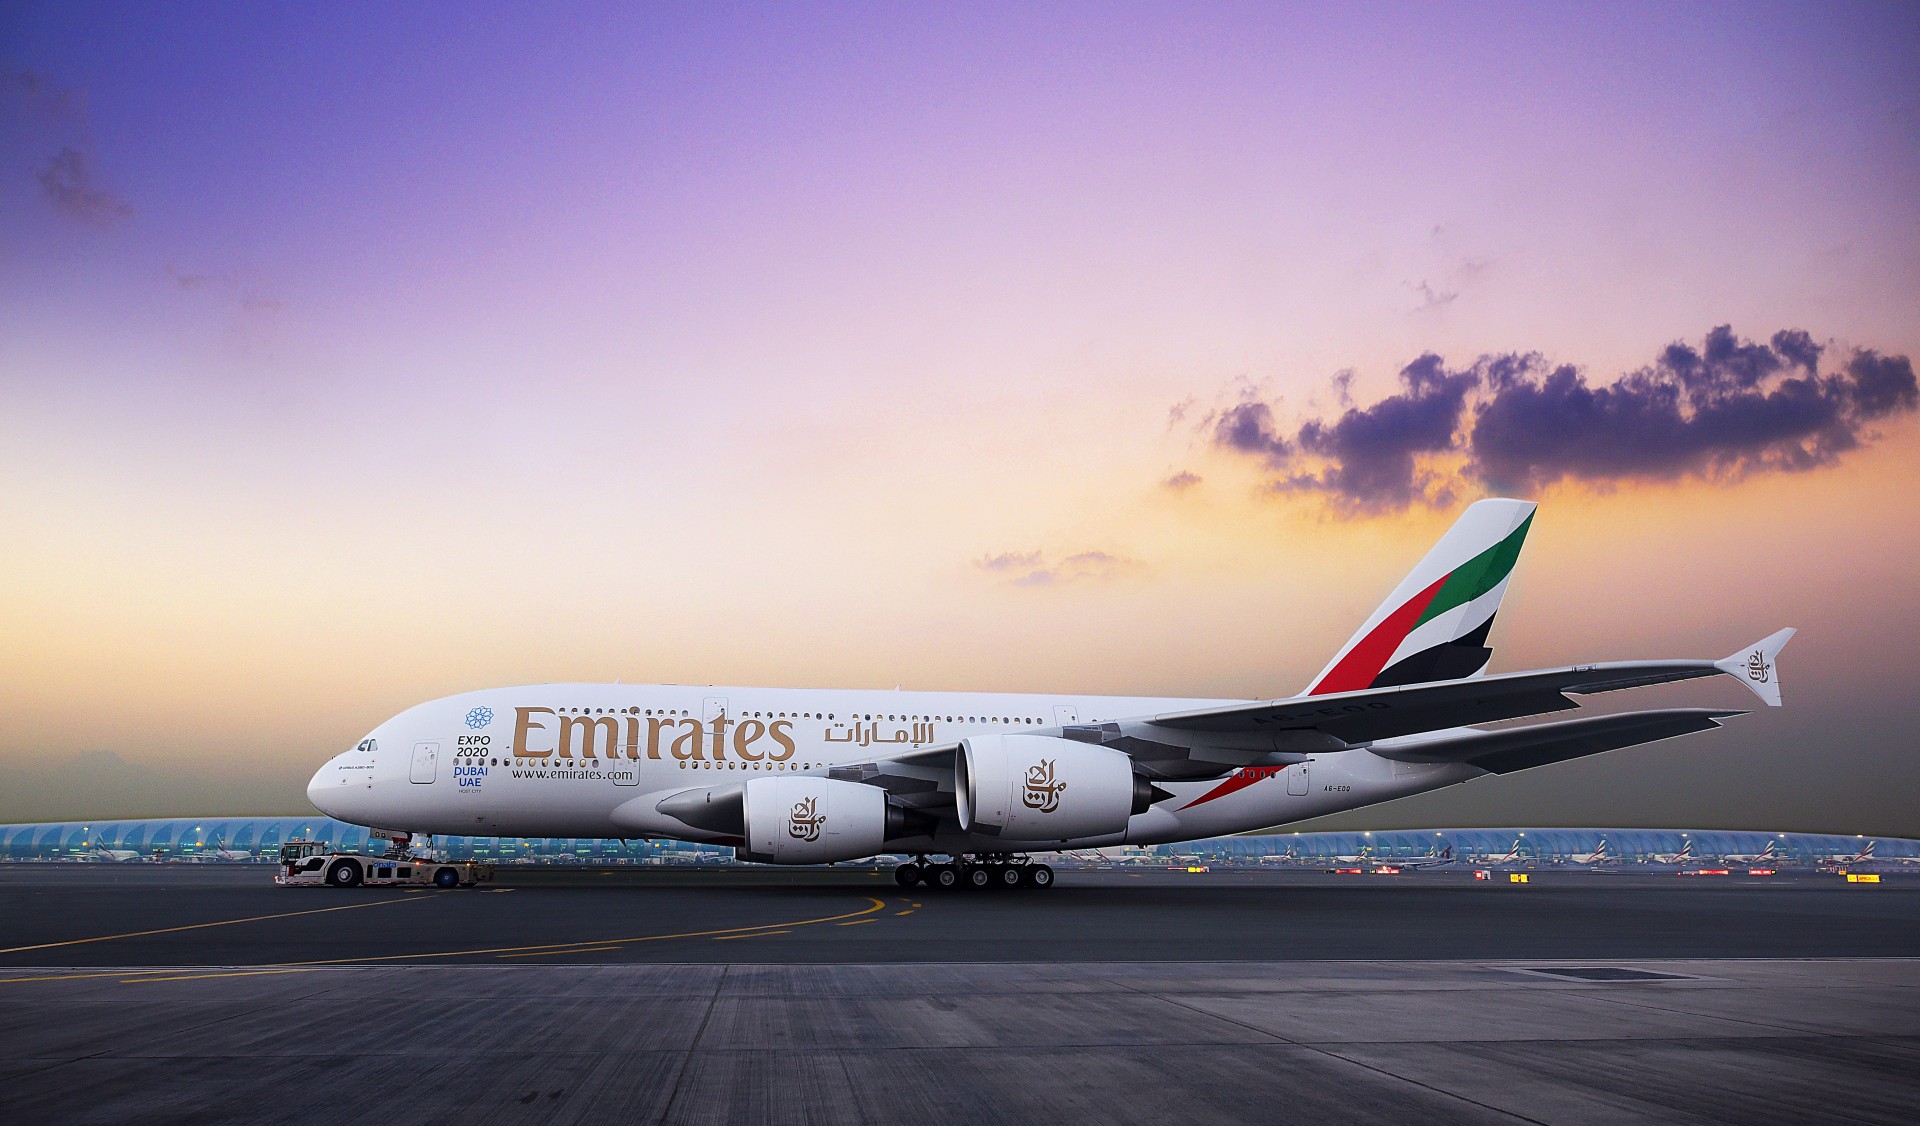 Emirates restarts its A380 aircraft to Perth in early December